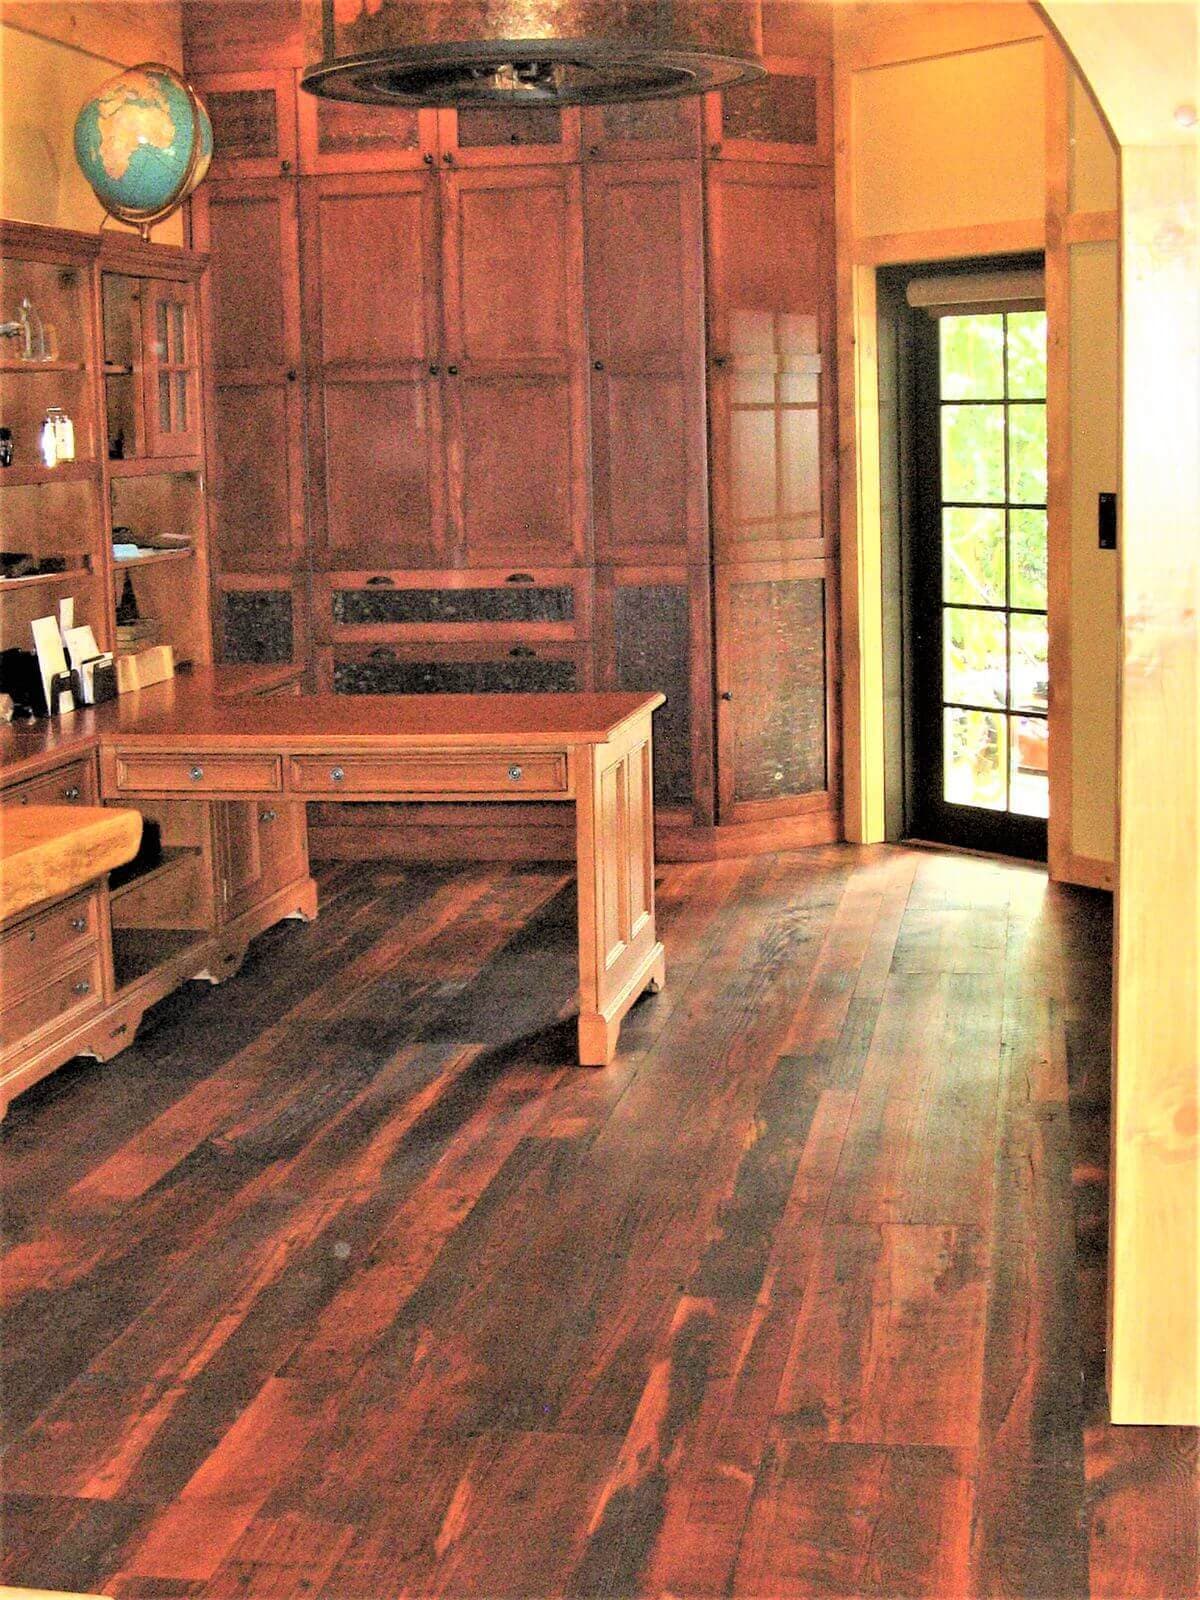 Antique heart pine character floor with woca rhode island brown oil finish